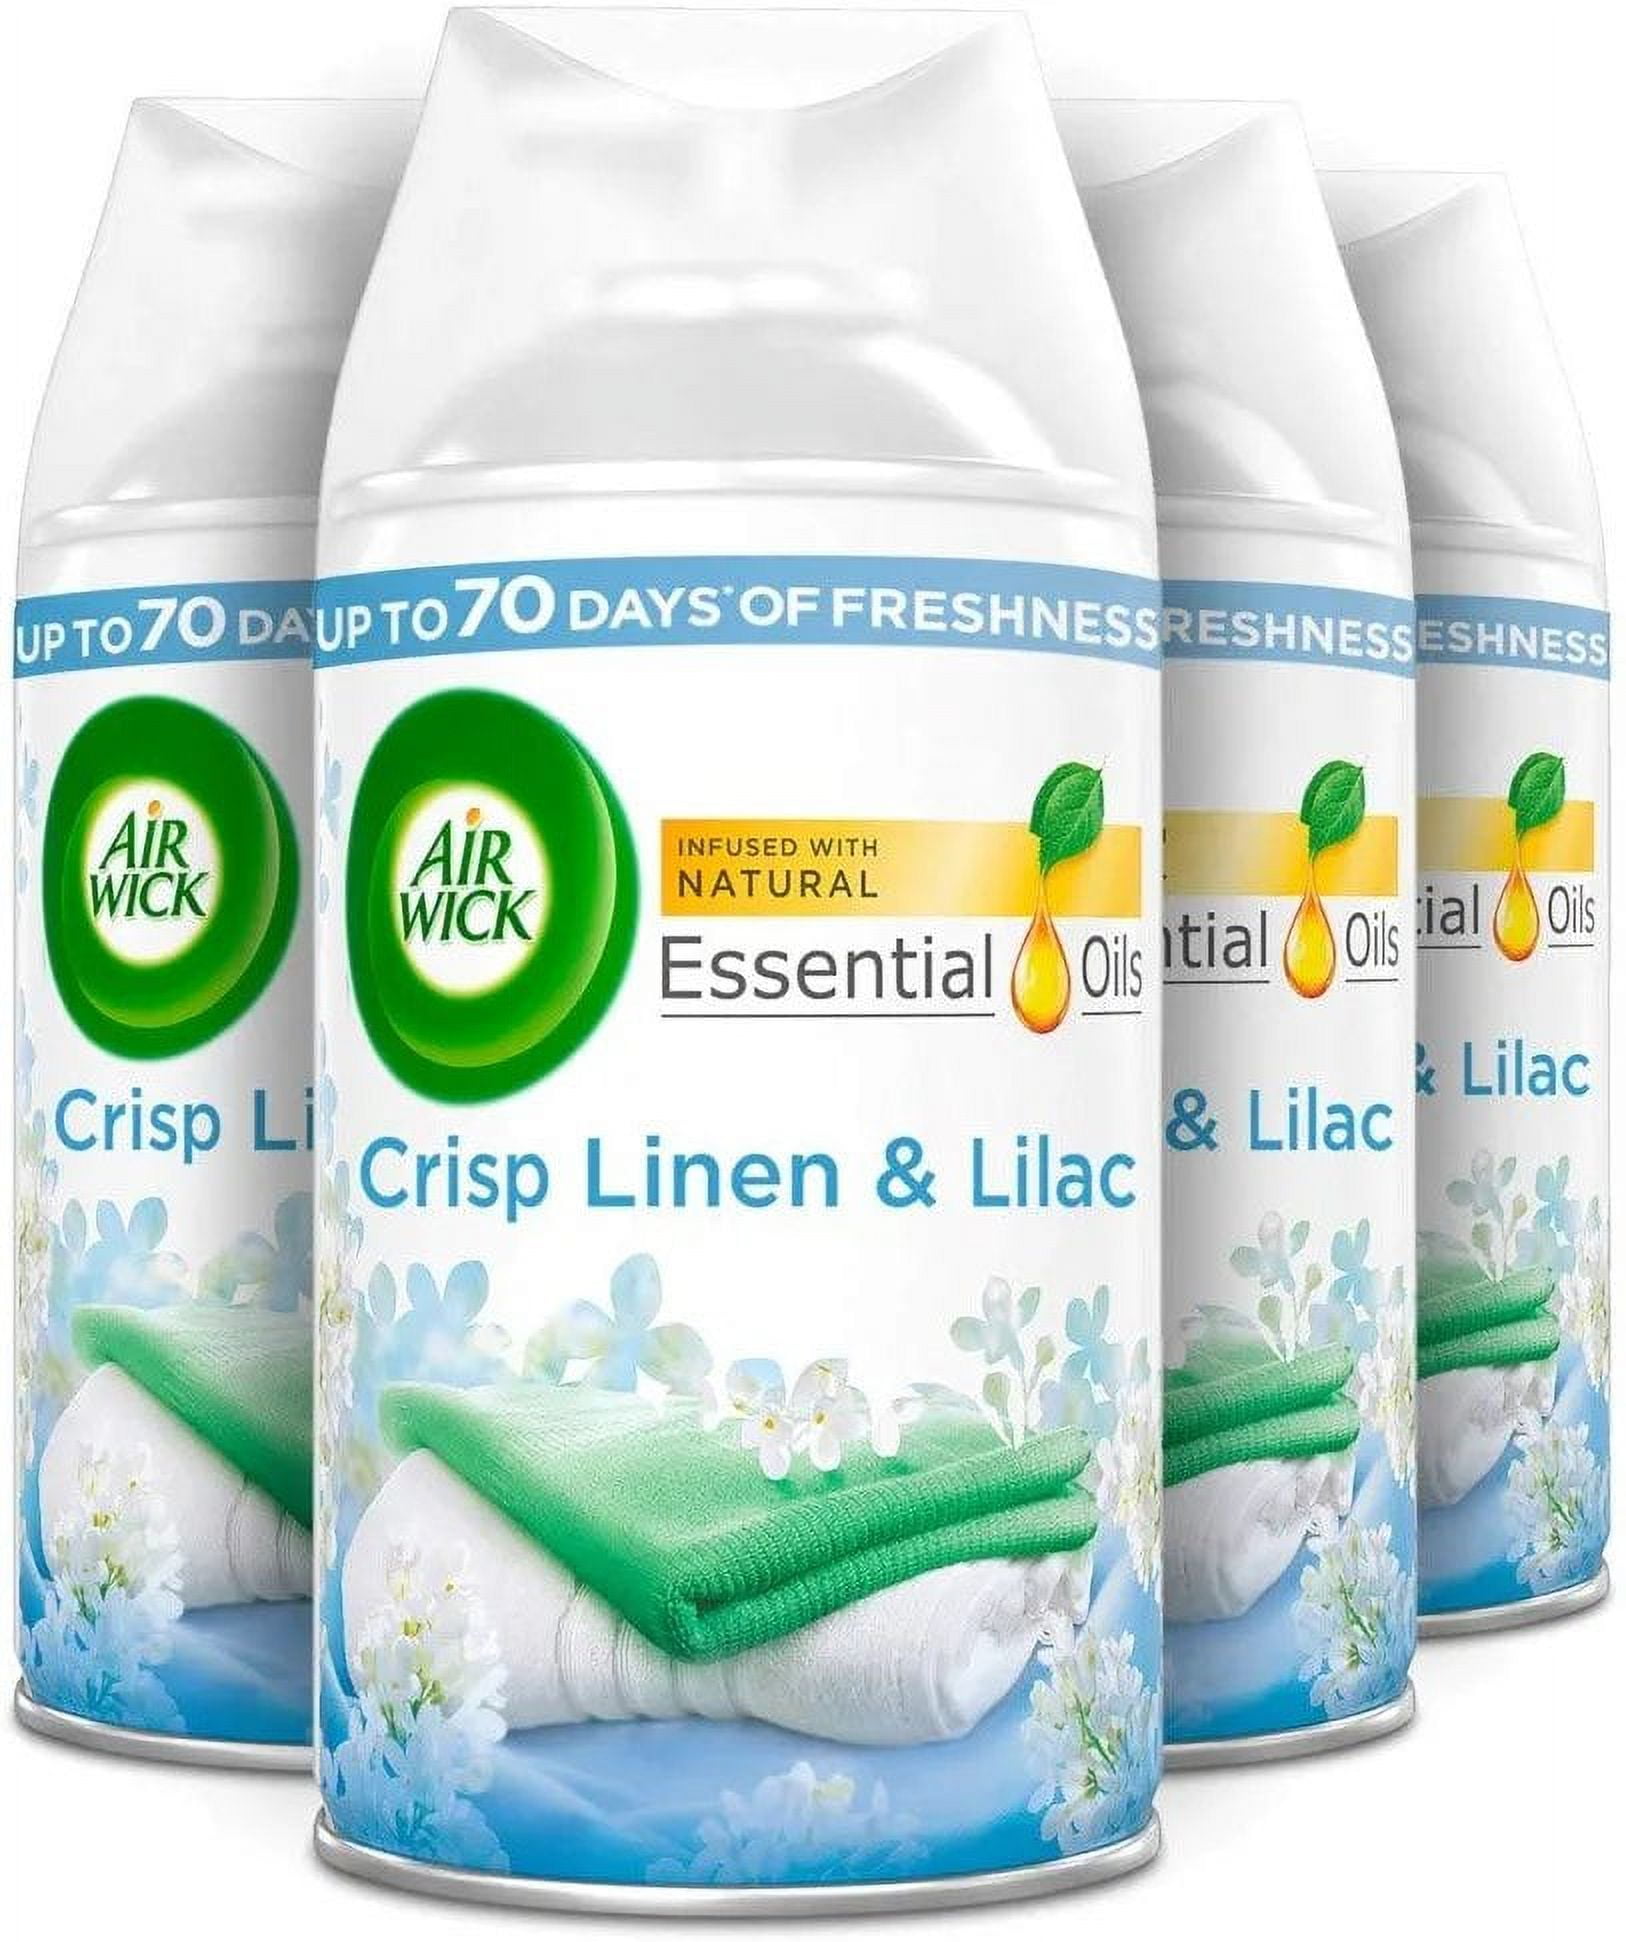 Air Wick Freshmatic Life Scents Linen in the Air low-priced - spar-pa, 3,49  €